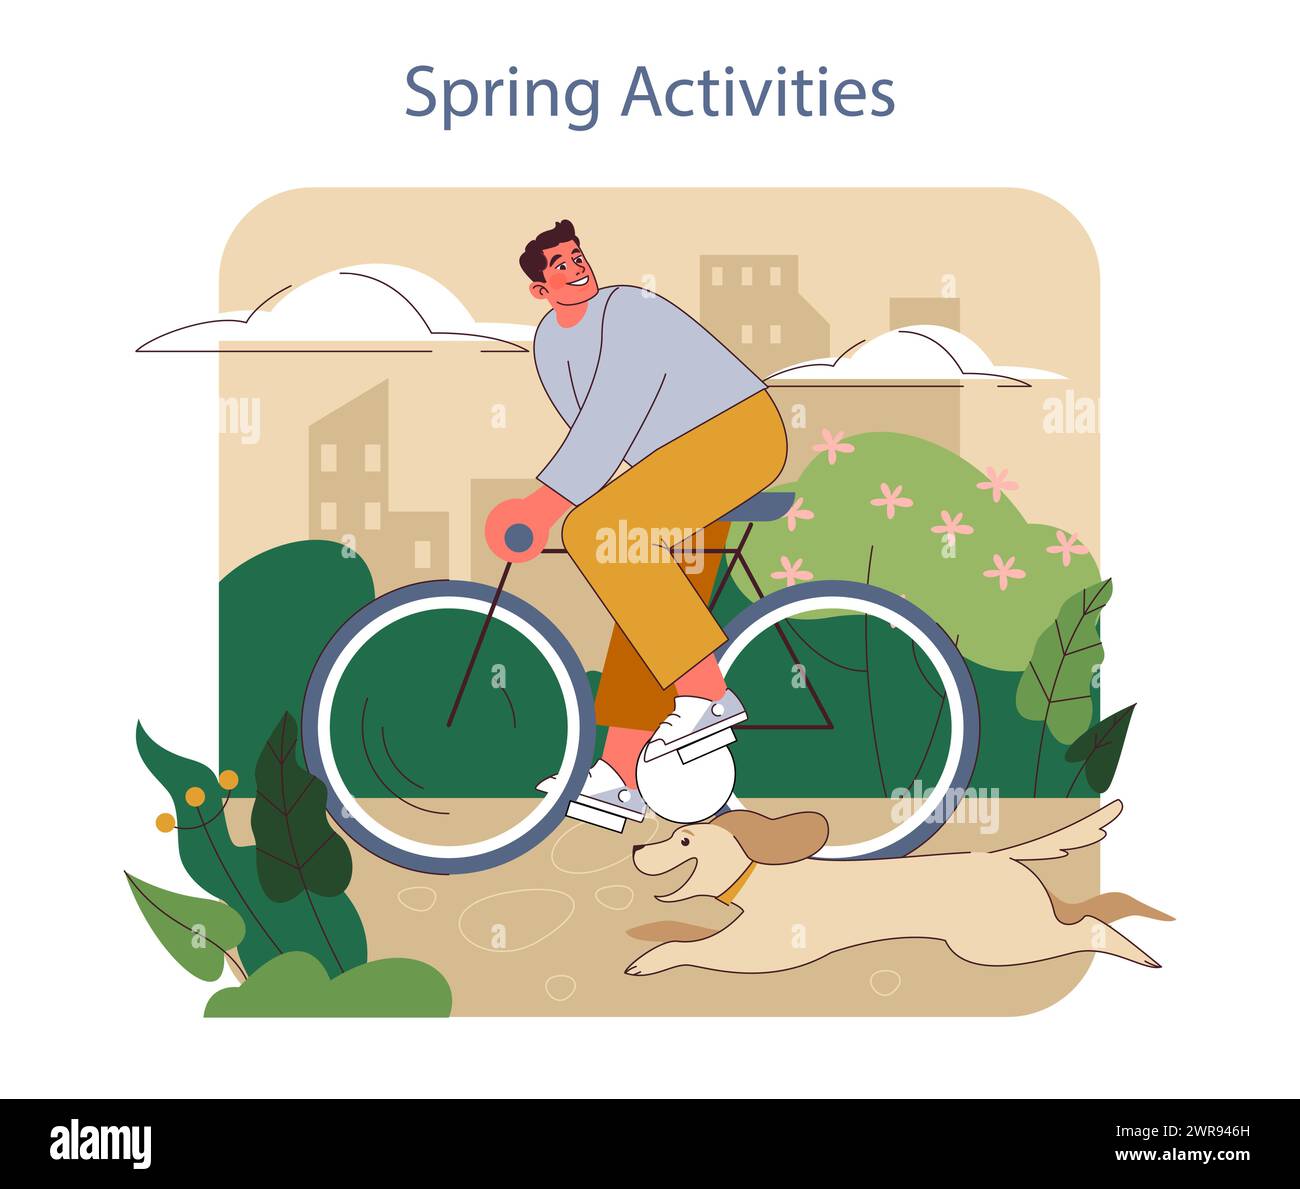 Spring Activities concept. Man enjoys a bike ride, accompanied by a playful dog, amidst a city park in bloom. Stock Vector